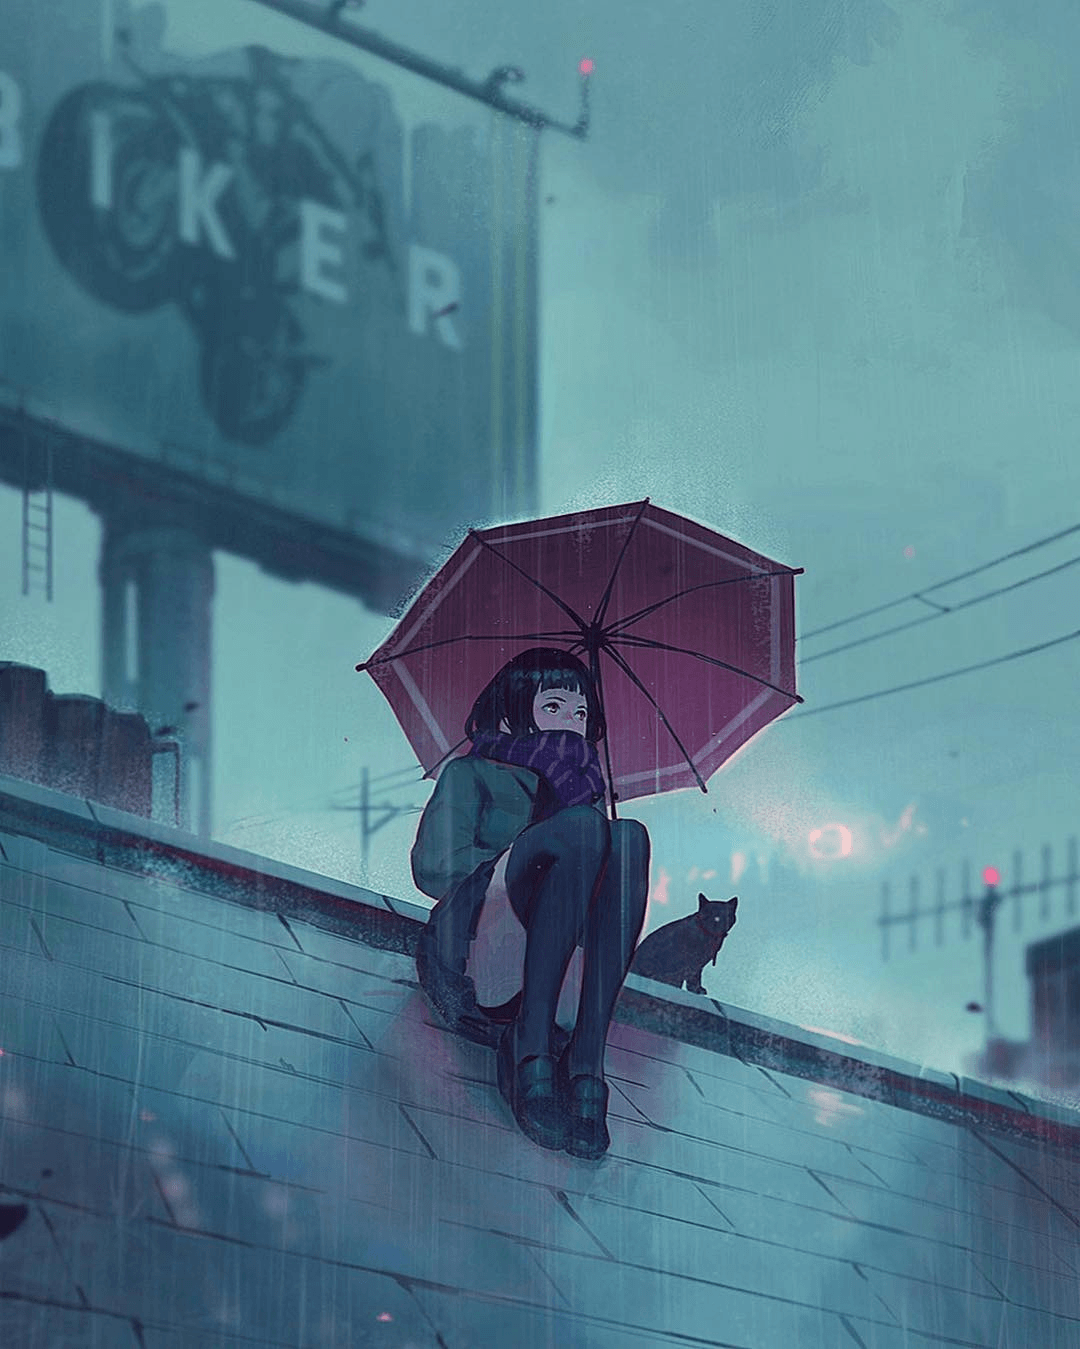 1080x2280 Anime Girl Dark Night Umbrella Raining 4k One Plus 6,Huawei  p20,Honor view 10,Vivo y85,Oppo f7,Xiaomi Mi A2 HD 4k Wallpapers, Images,  Backgrounds, Photos and Pictures